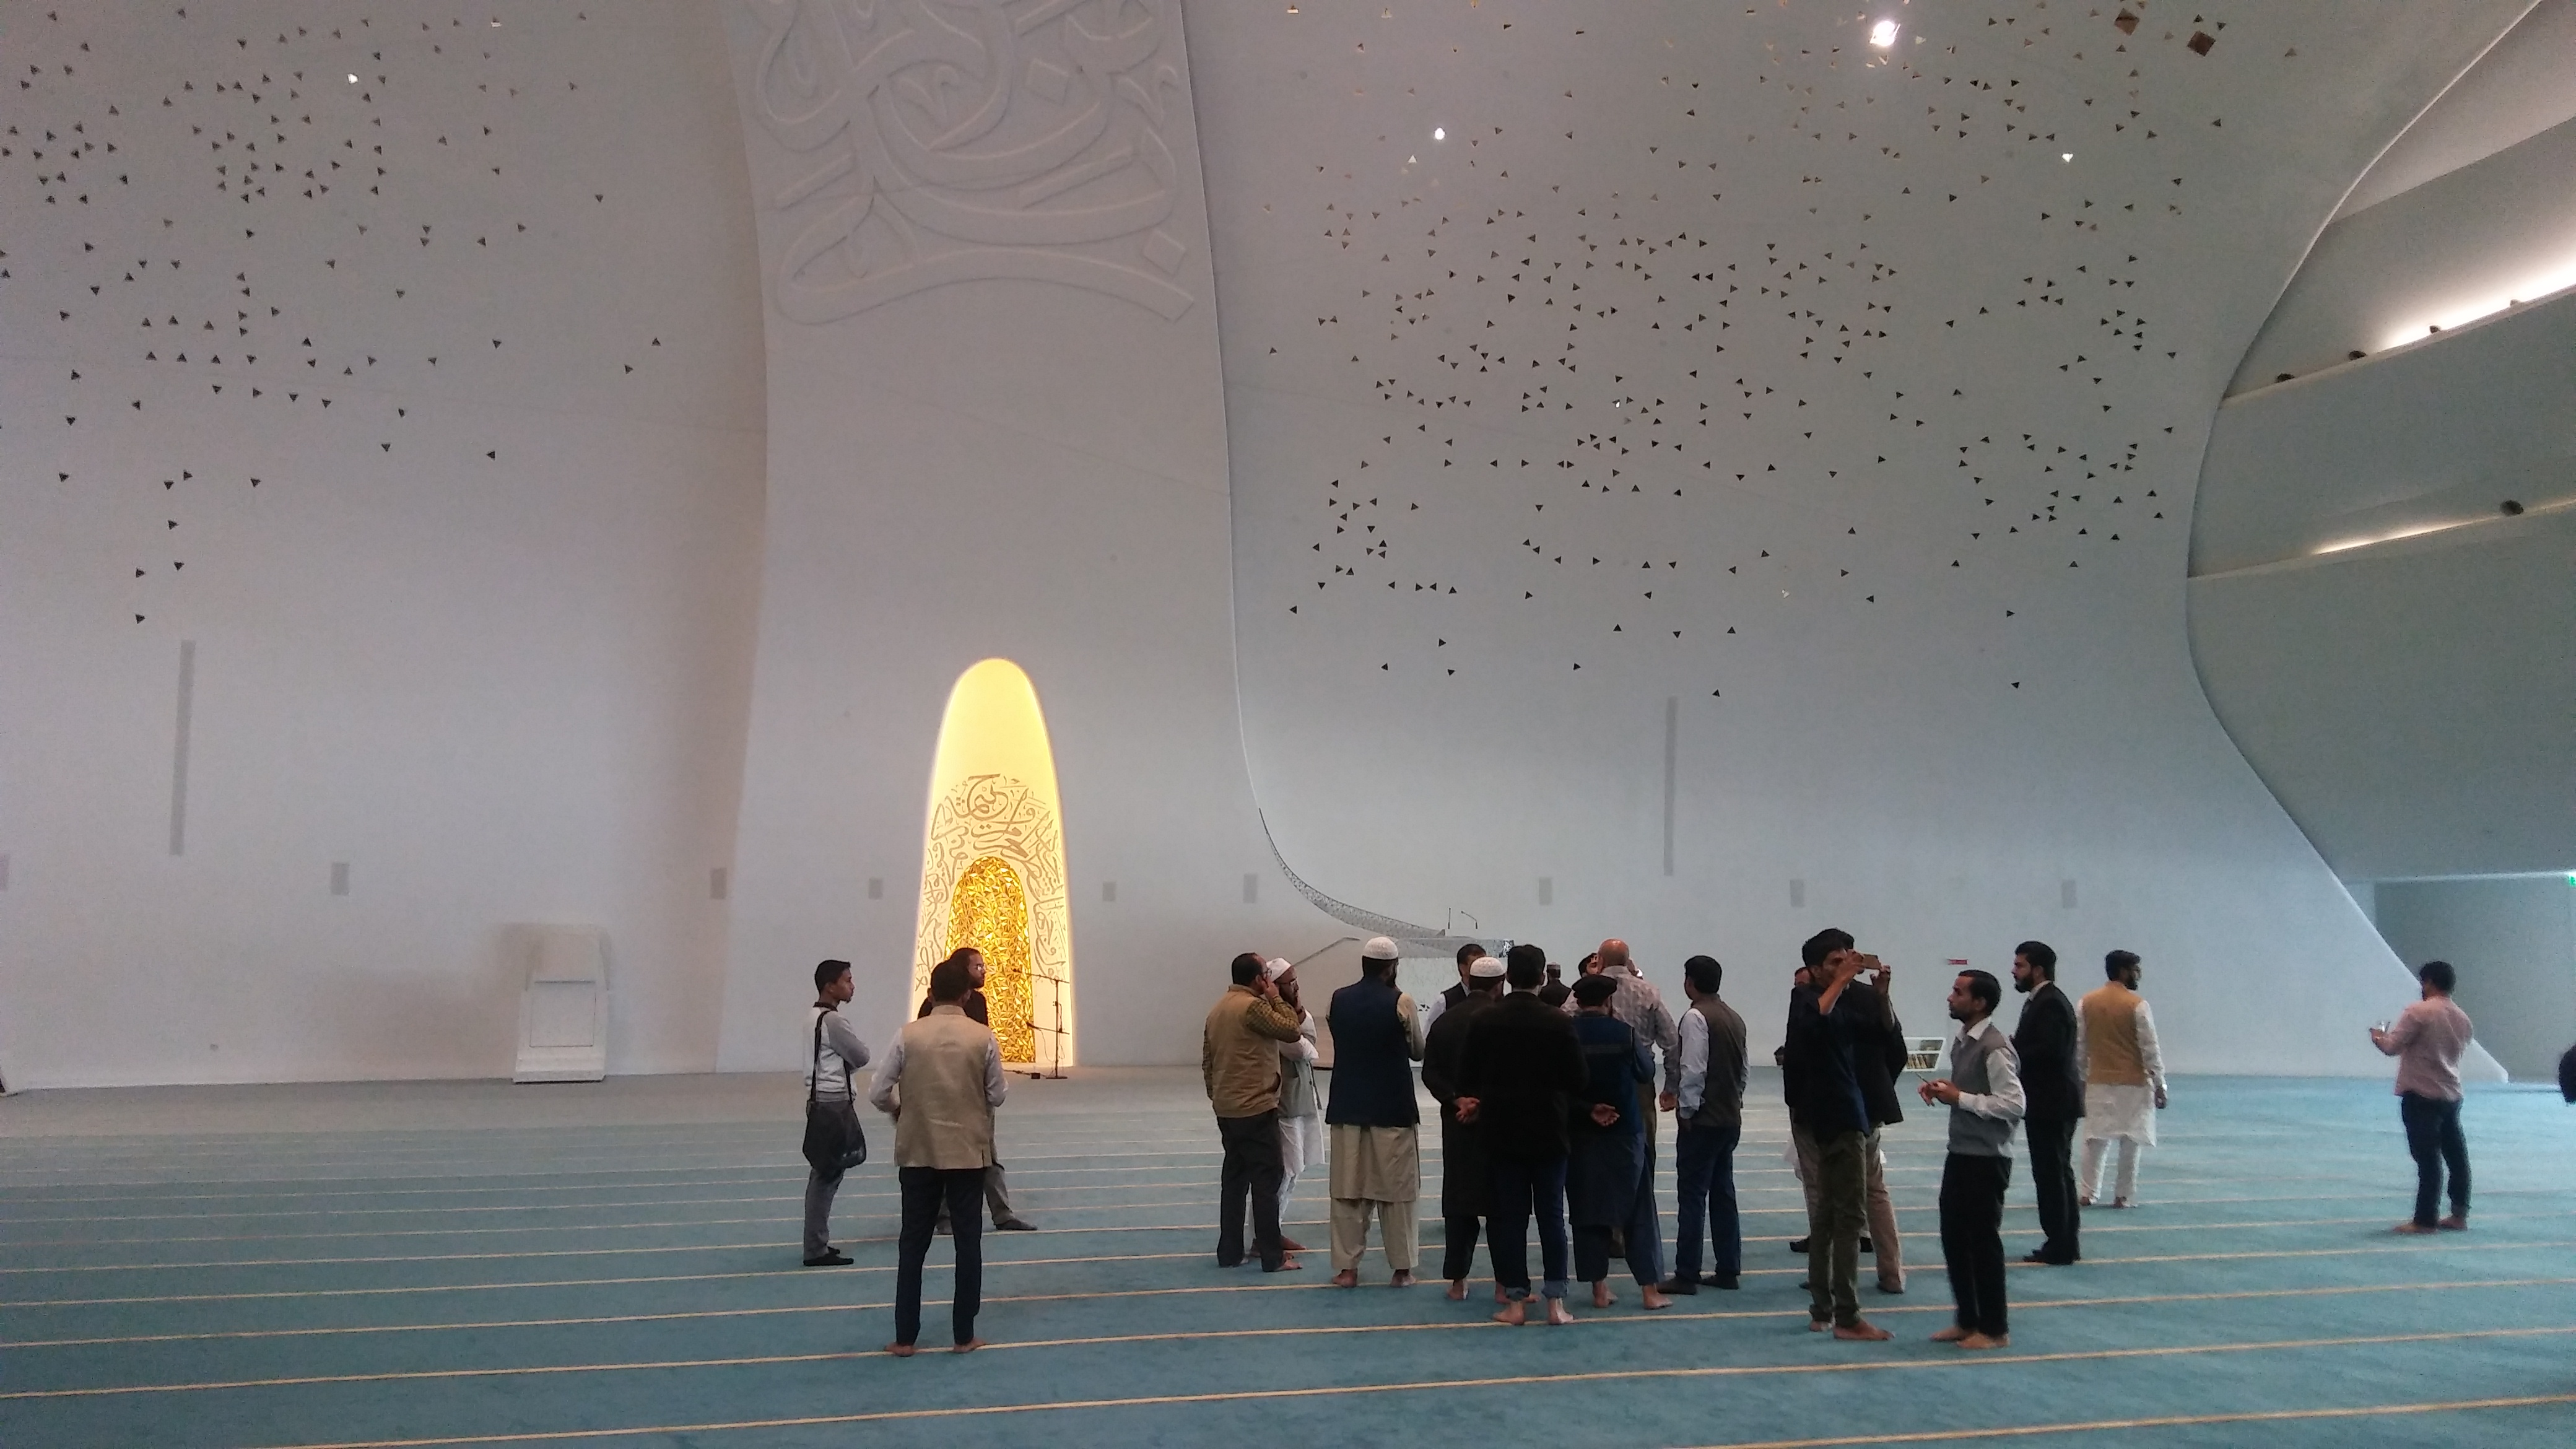 Photo Credit: Javed Akhatar. Madrasa Discourses students in the Education City Mosque in Doha in December 2017.